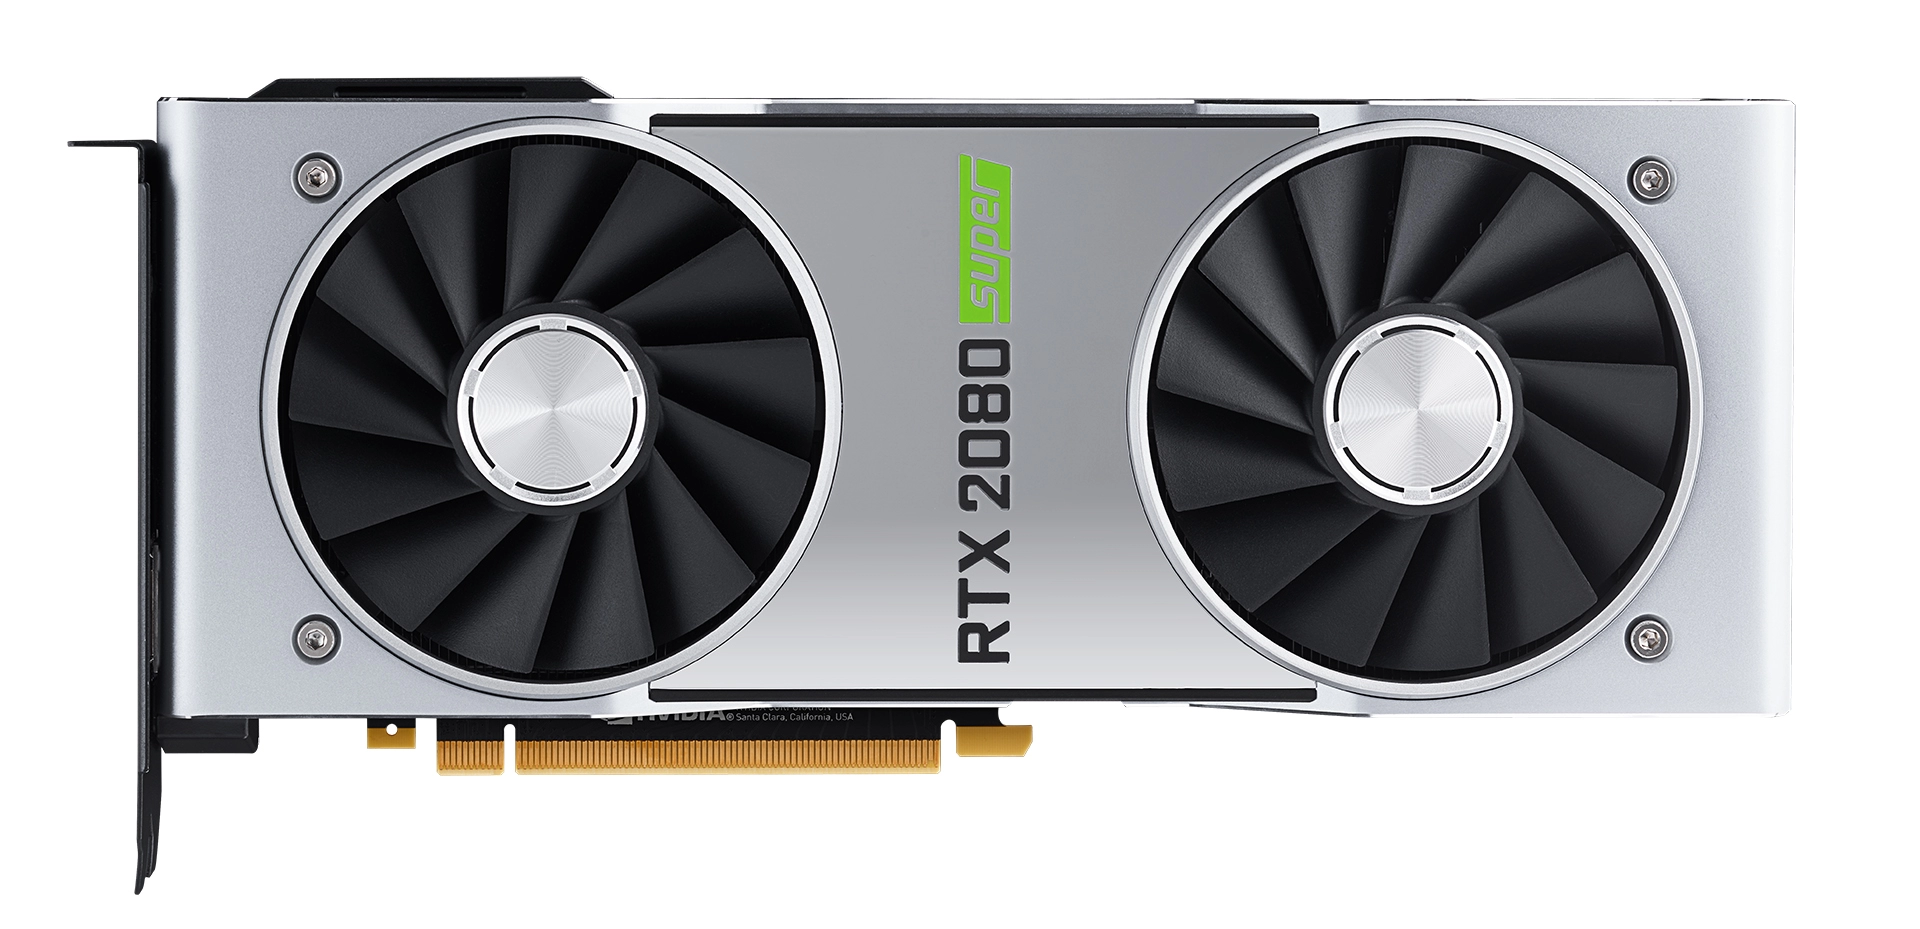 Nvidia GeForce RTX 2080 Super Founders Edition Image